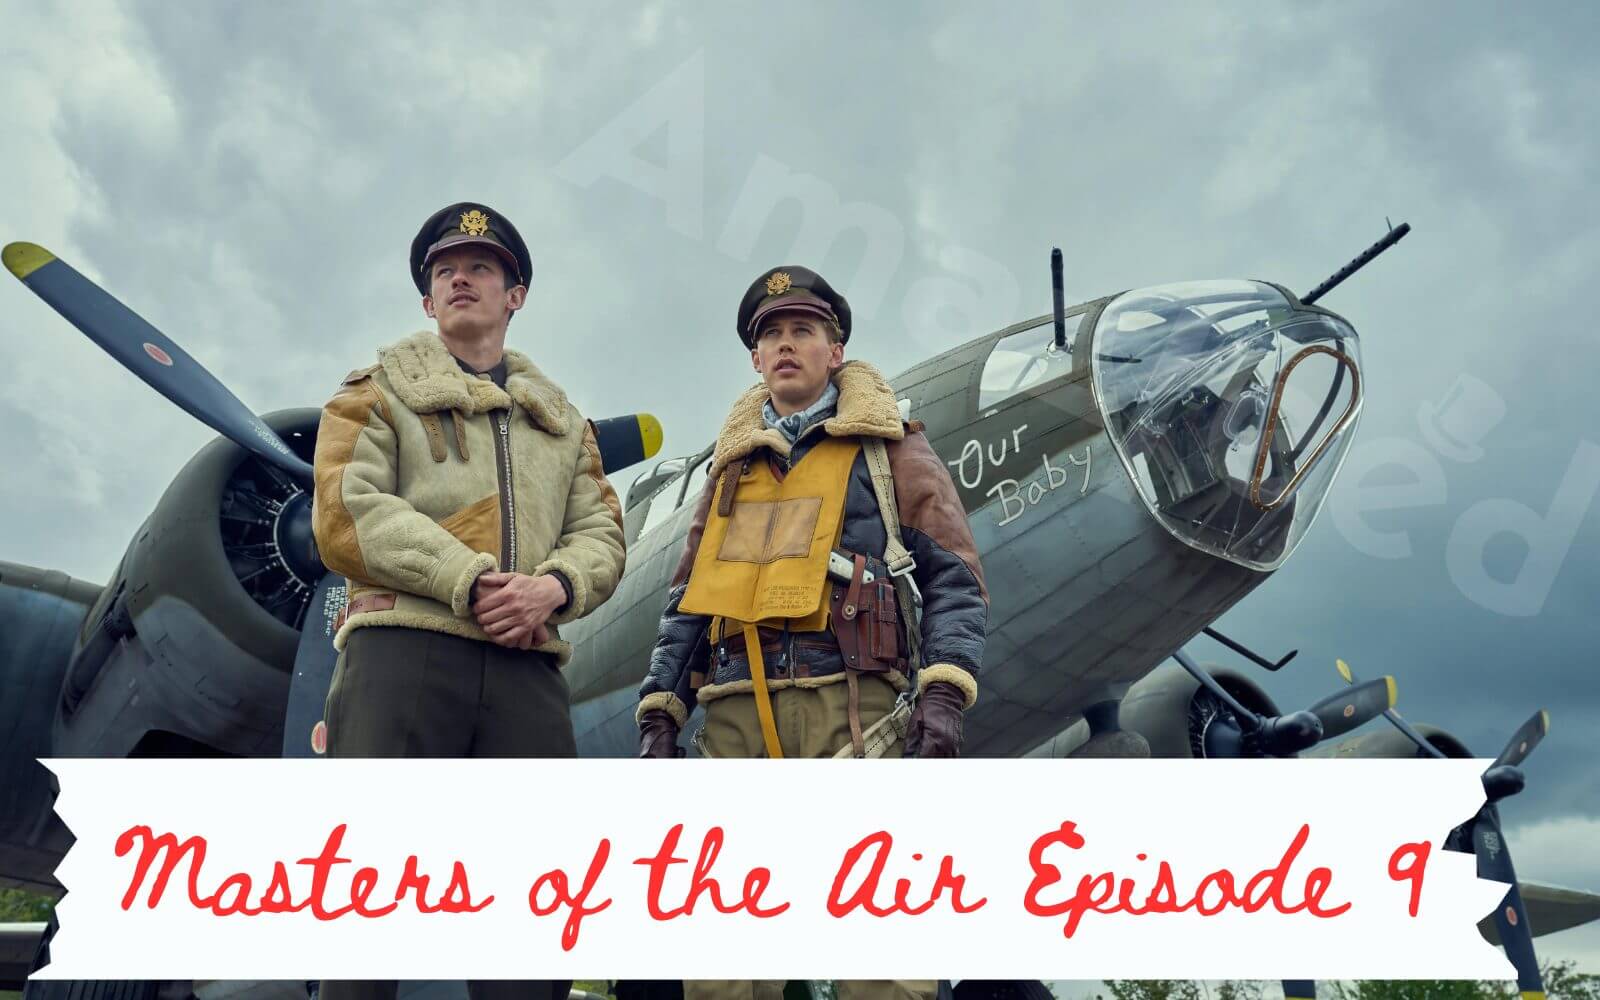 Masters of the Air Episode 9 Release date & time